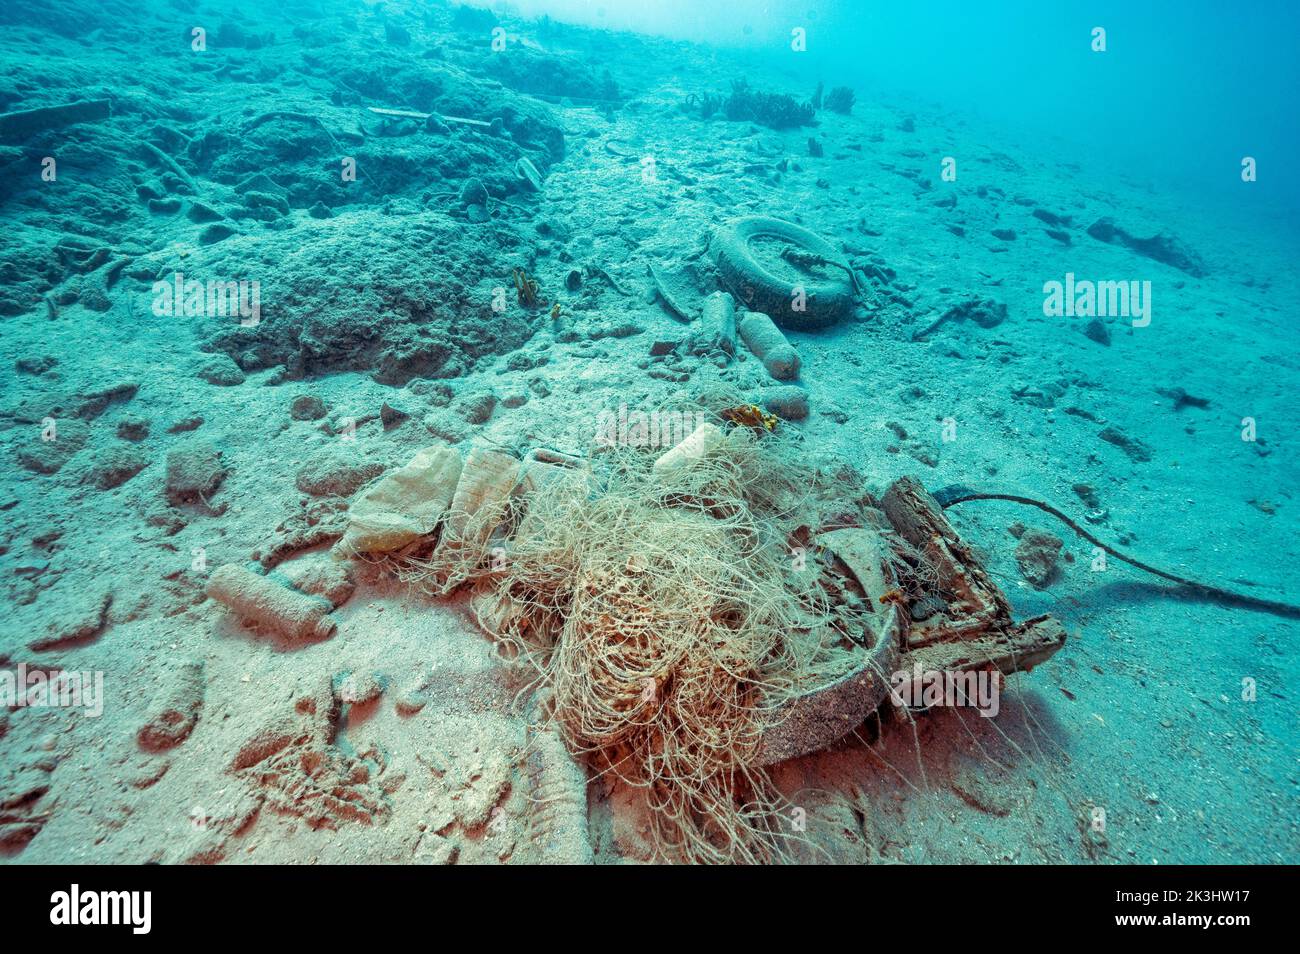 Underwater clean-up of extensive garbages over the ancient shipwreck Bozburun Marmaris Turkey. Stock Photo